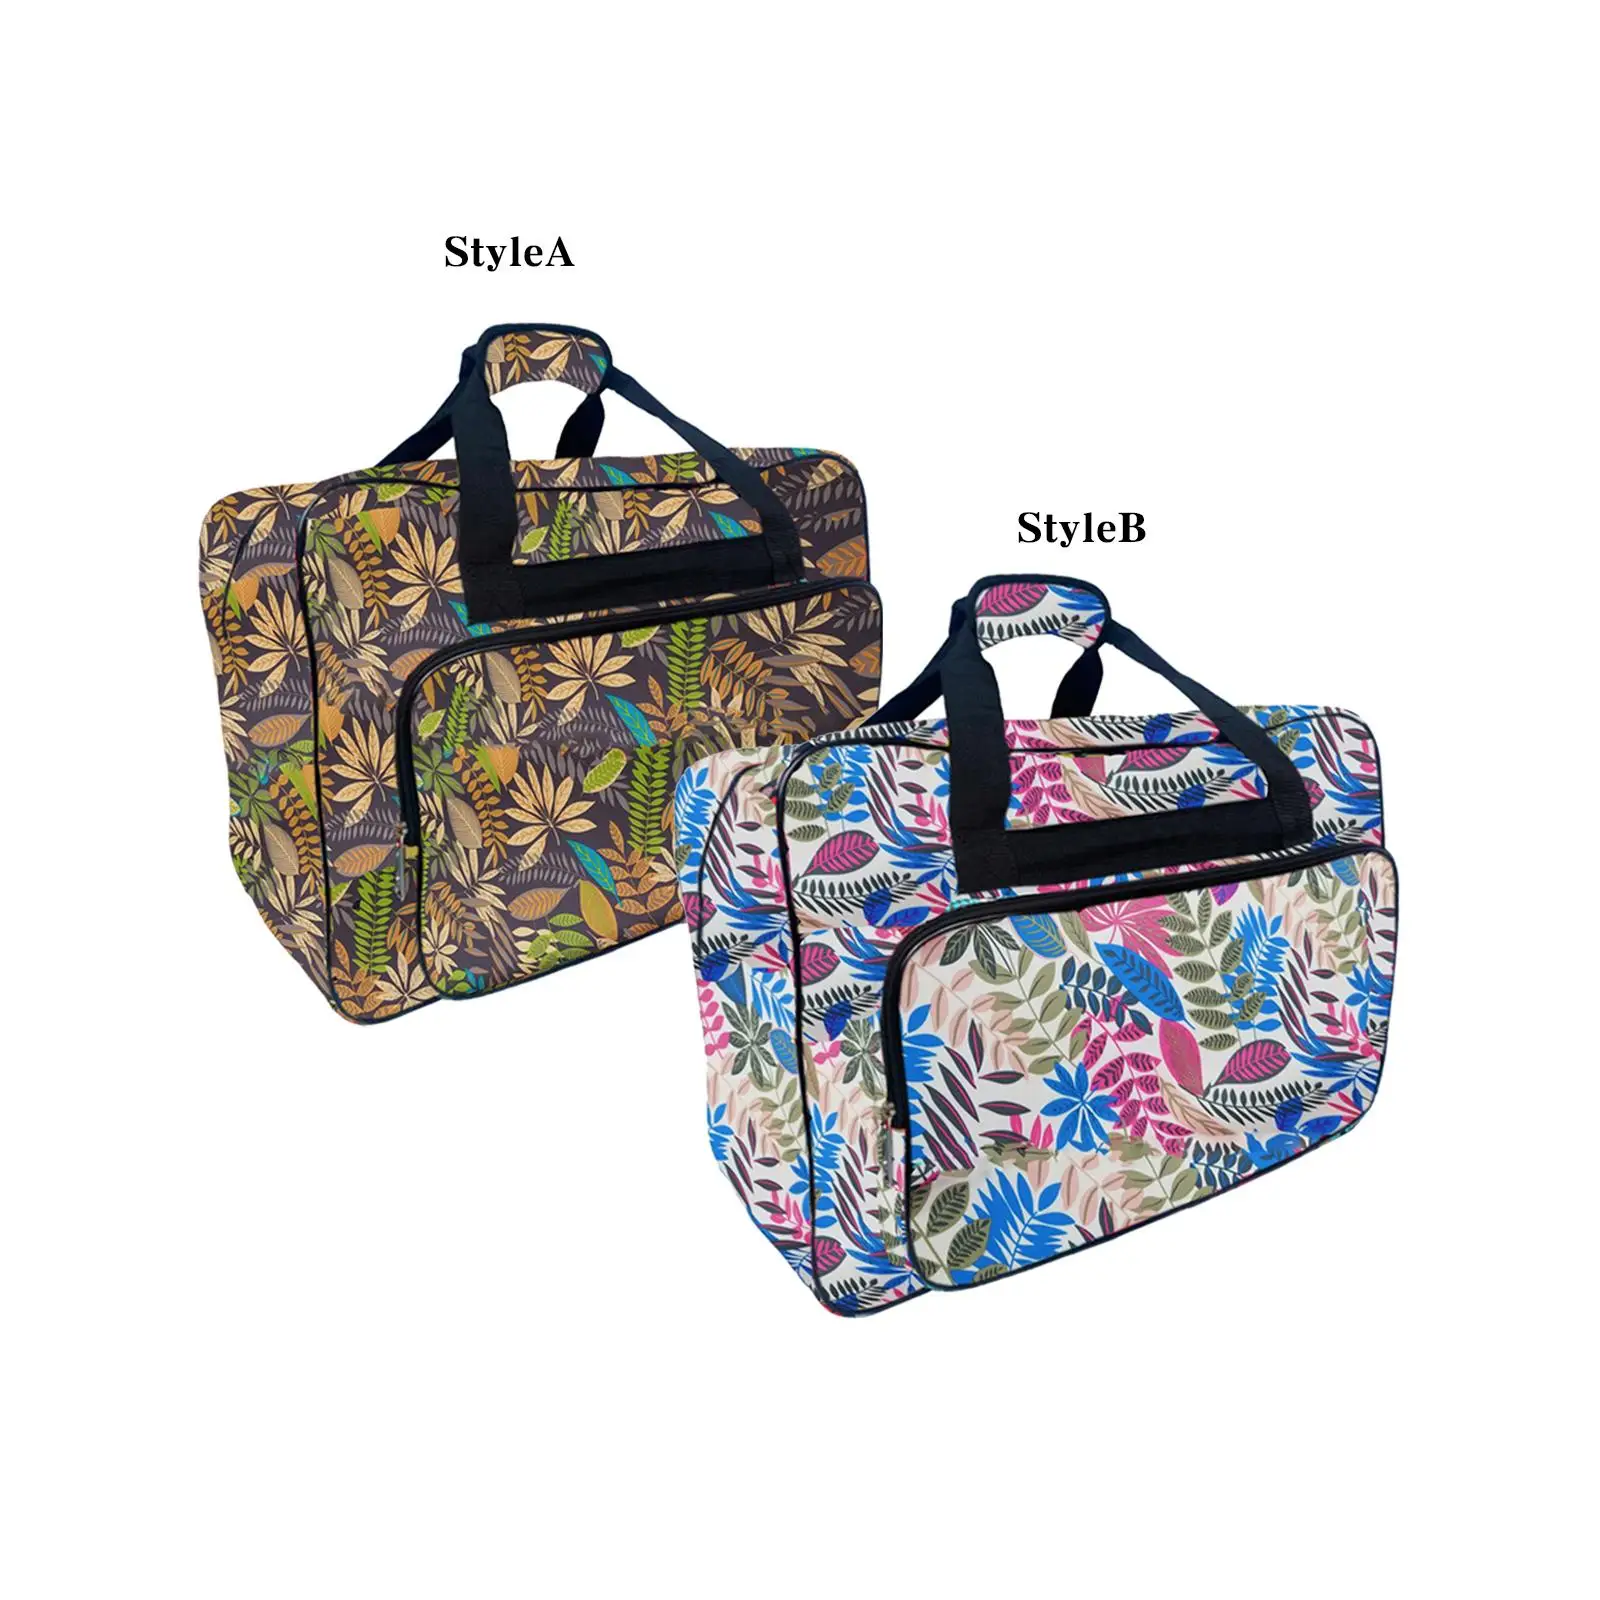 Universal Sewing Machine bag Pockets with Pockets with Padding Pad Handbag Tote Carrier for Standard Sewer